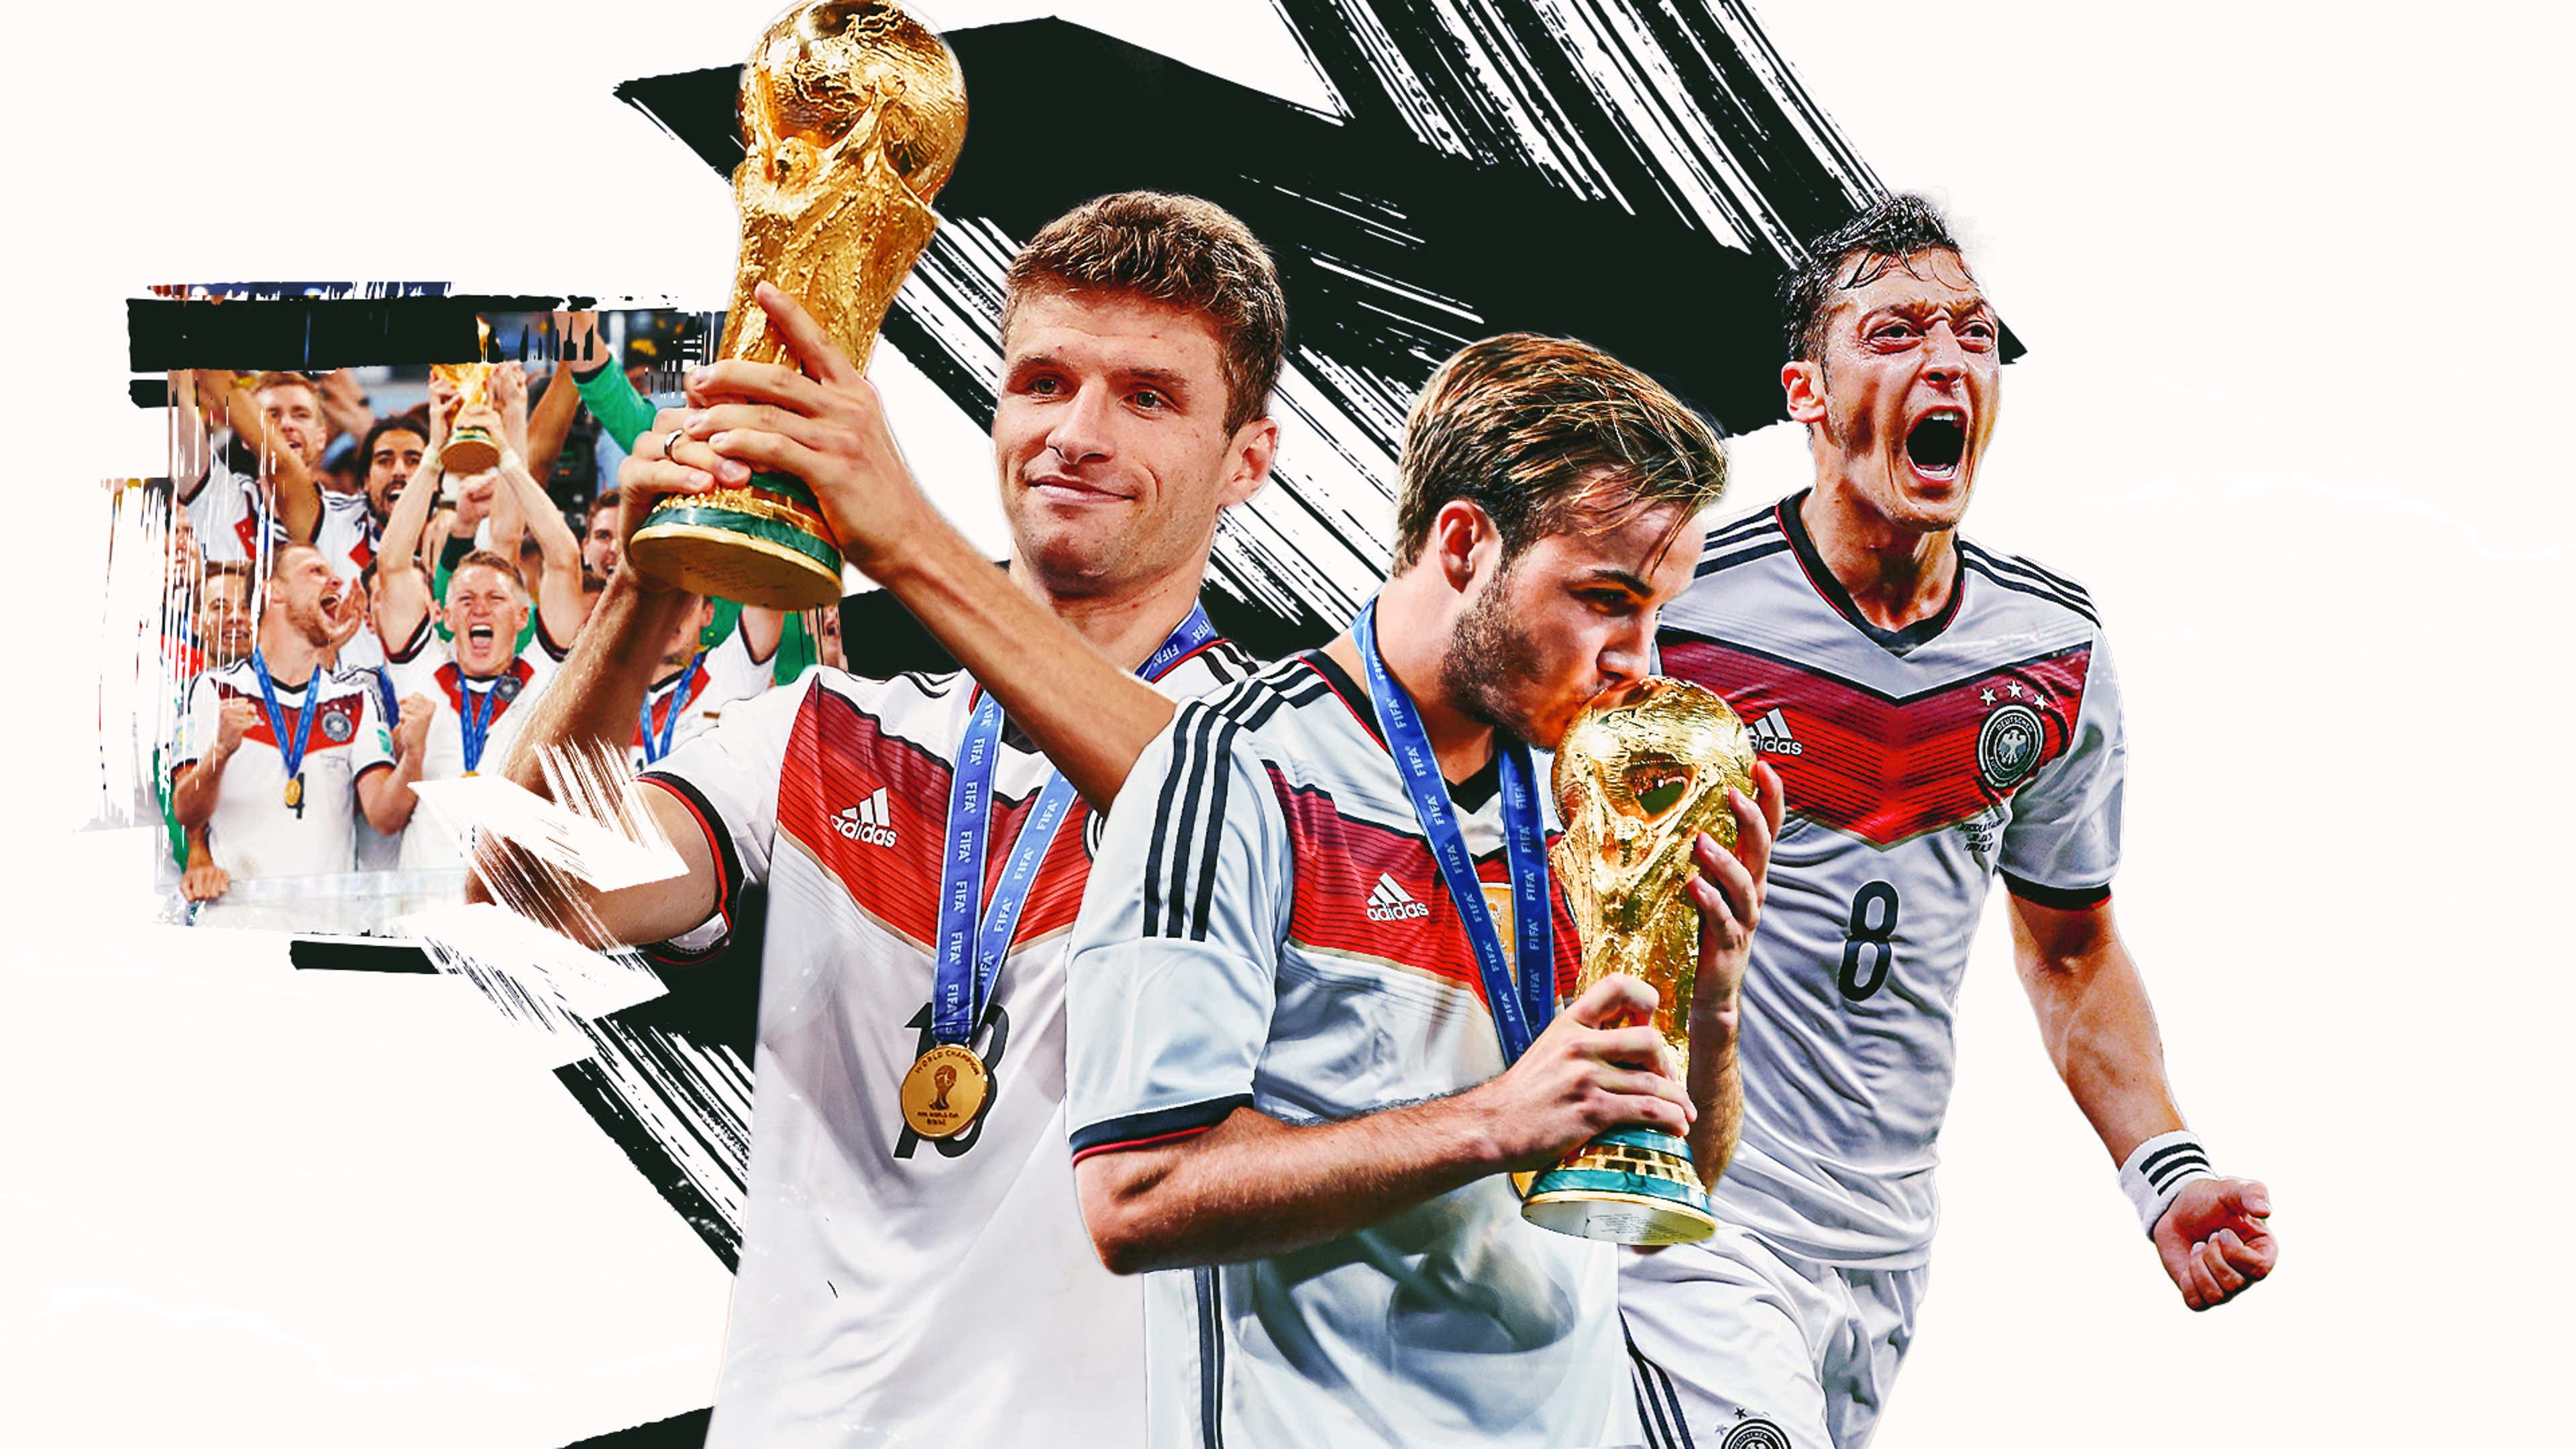 World Cup 2014: Germany Defeats Argentina in Final - The New York Times